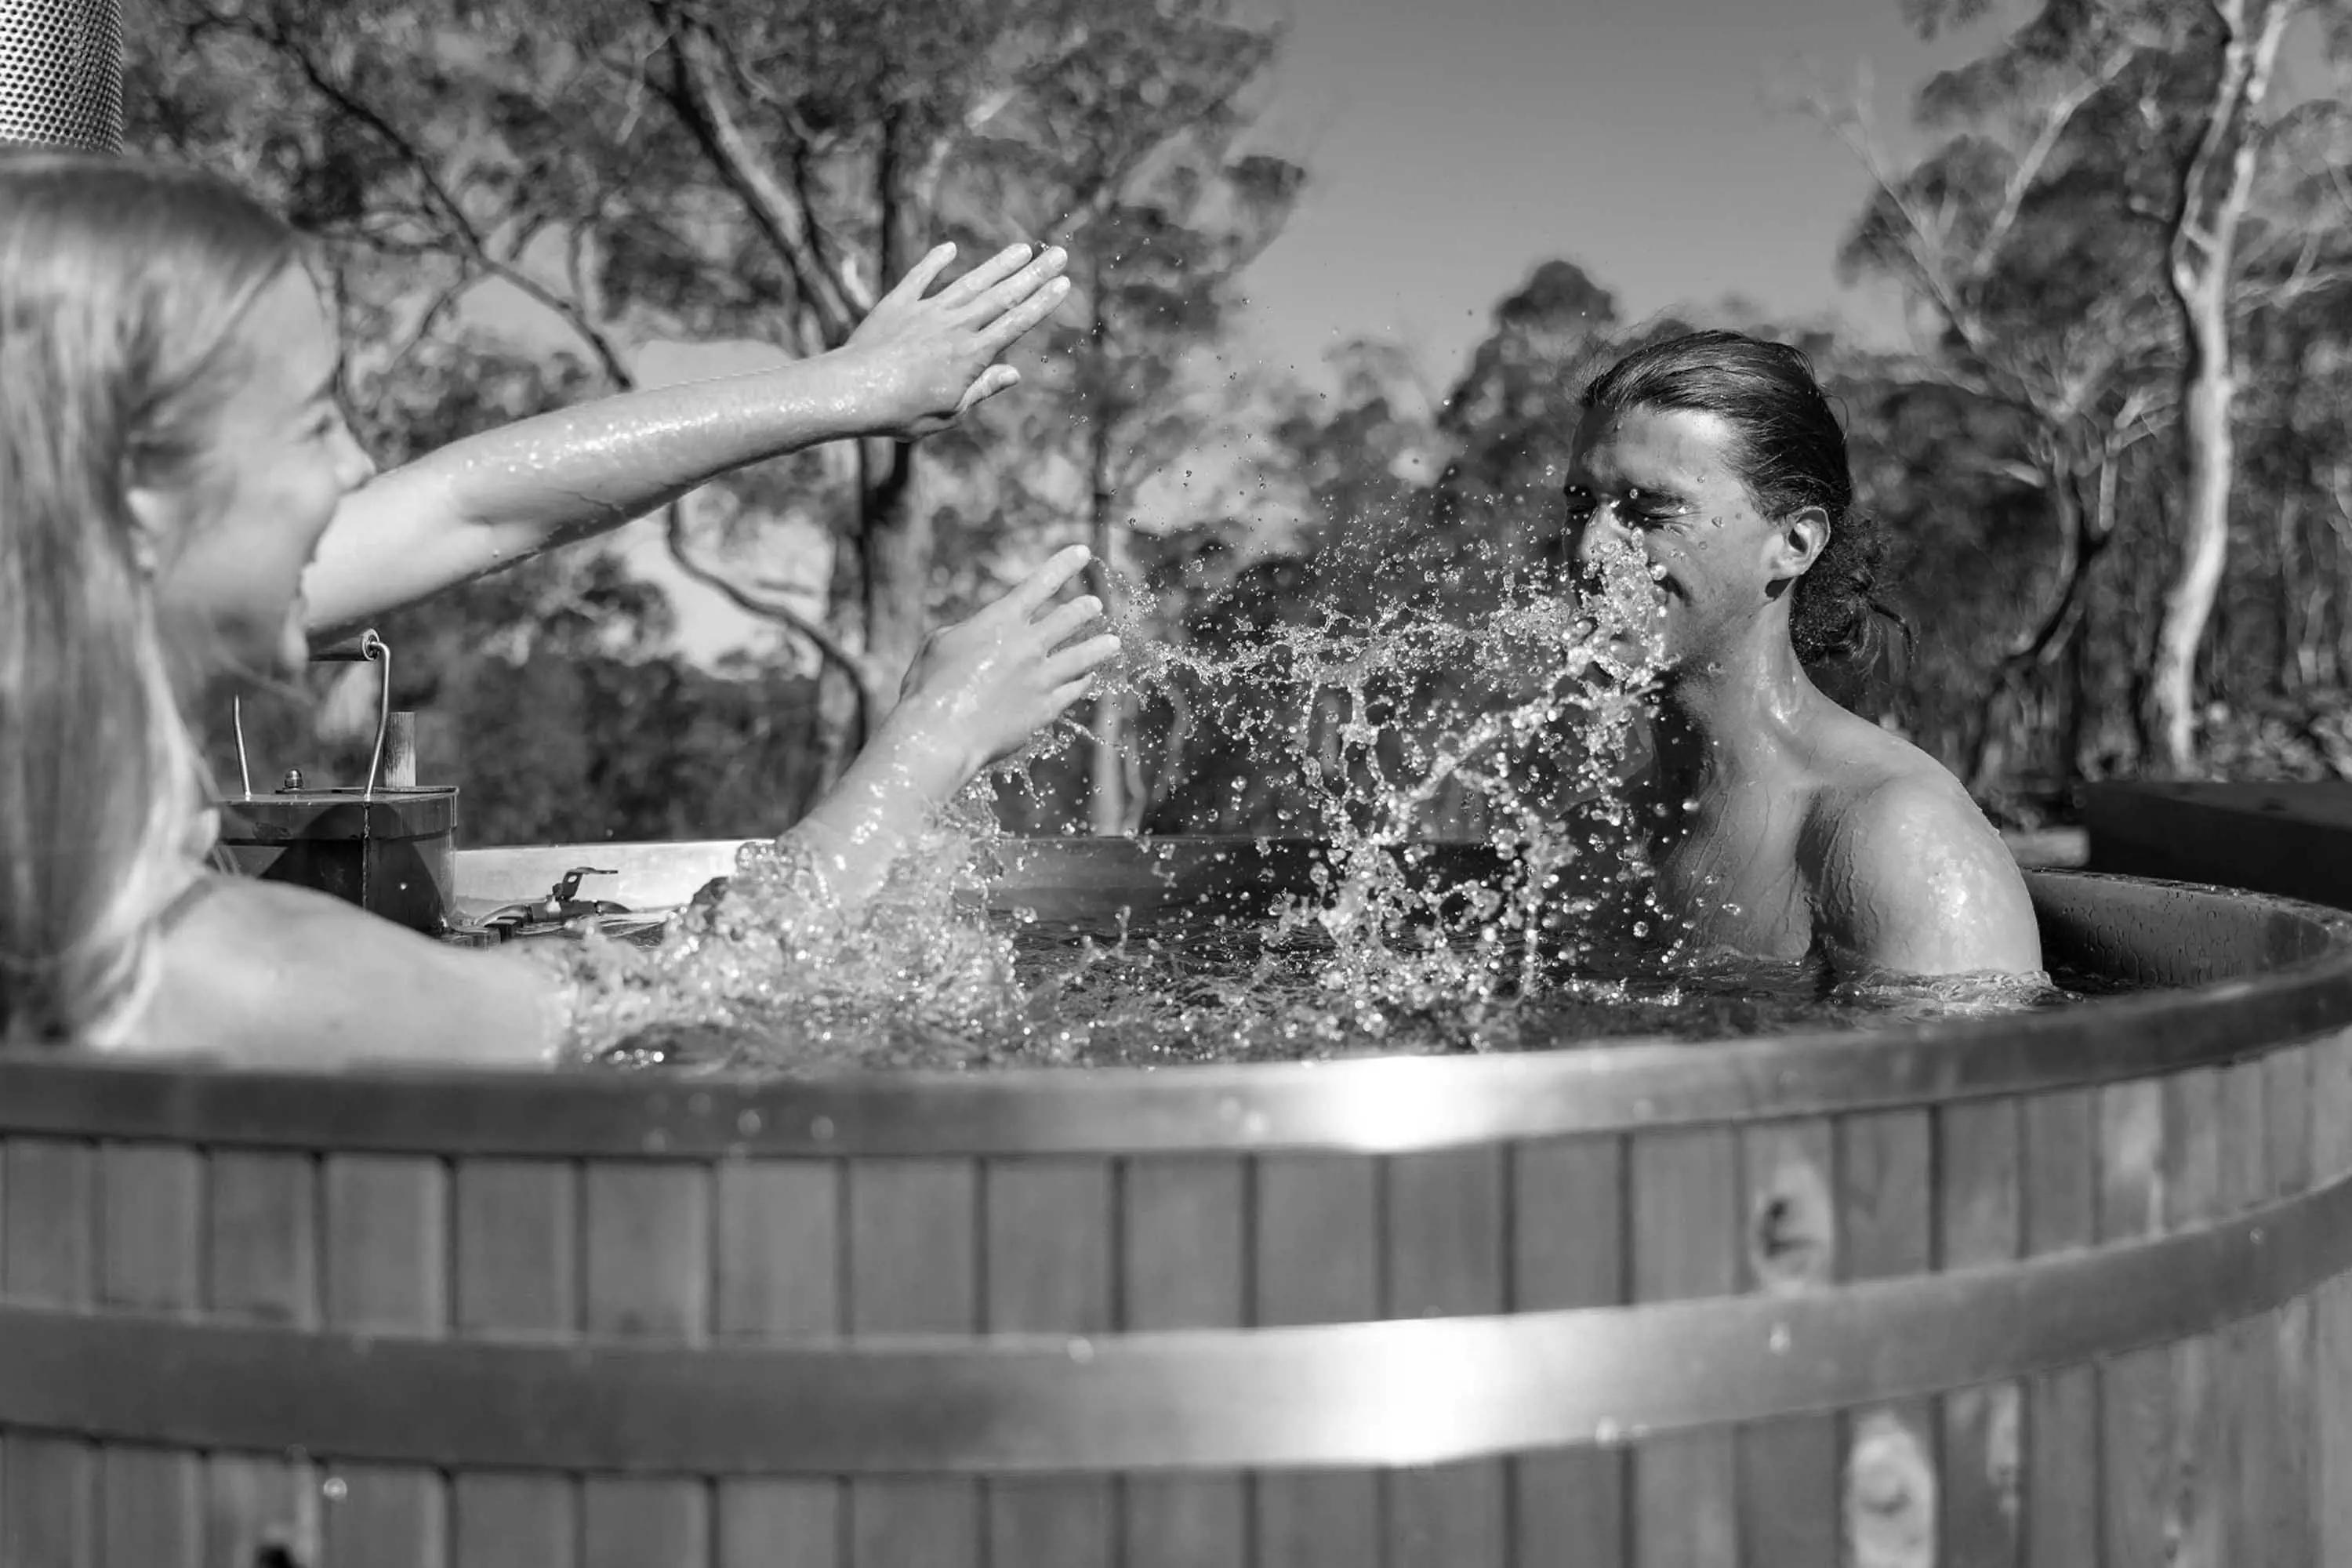 A young couple splash water in a large, outdoor hot-water tub made of wood.